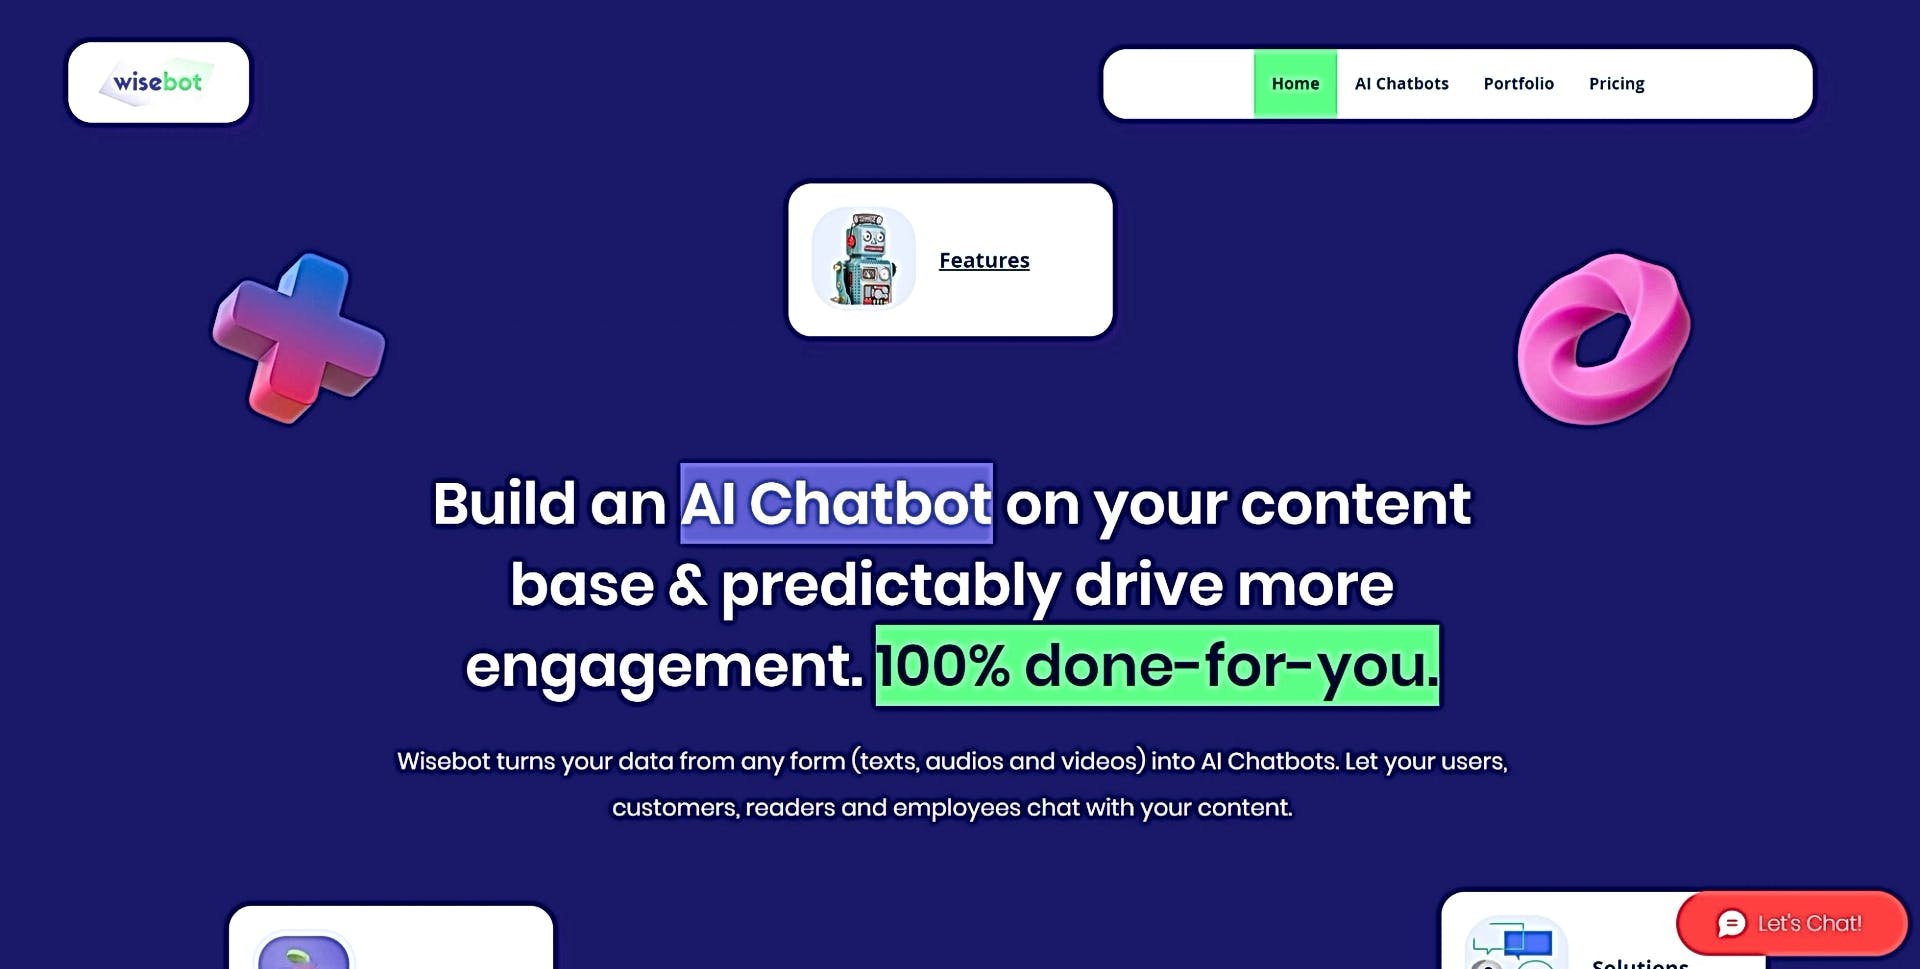 Wisebot featured